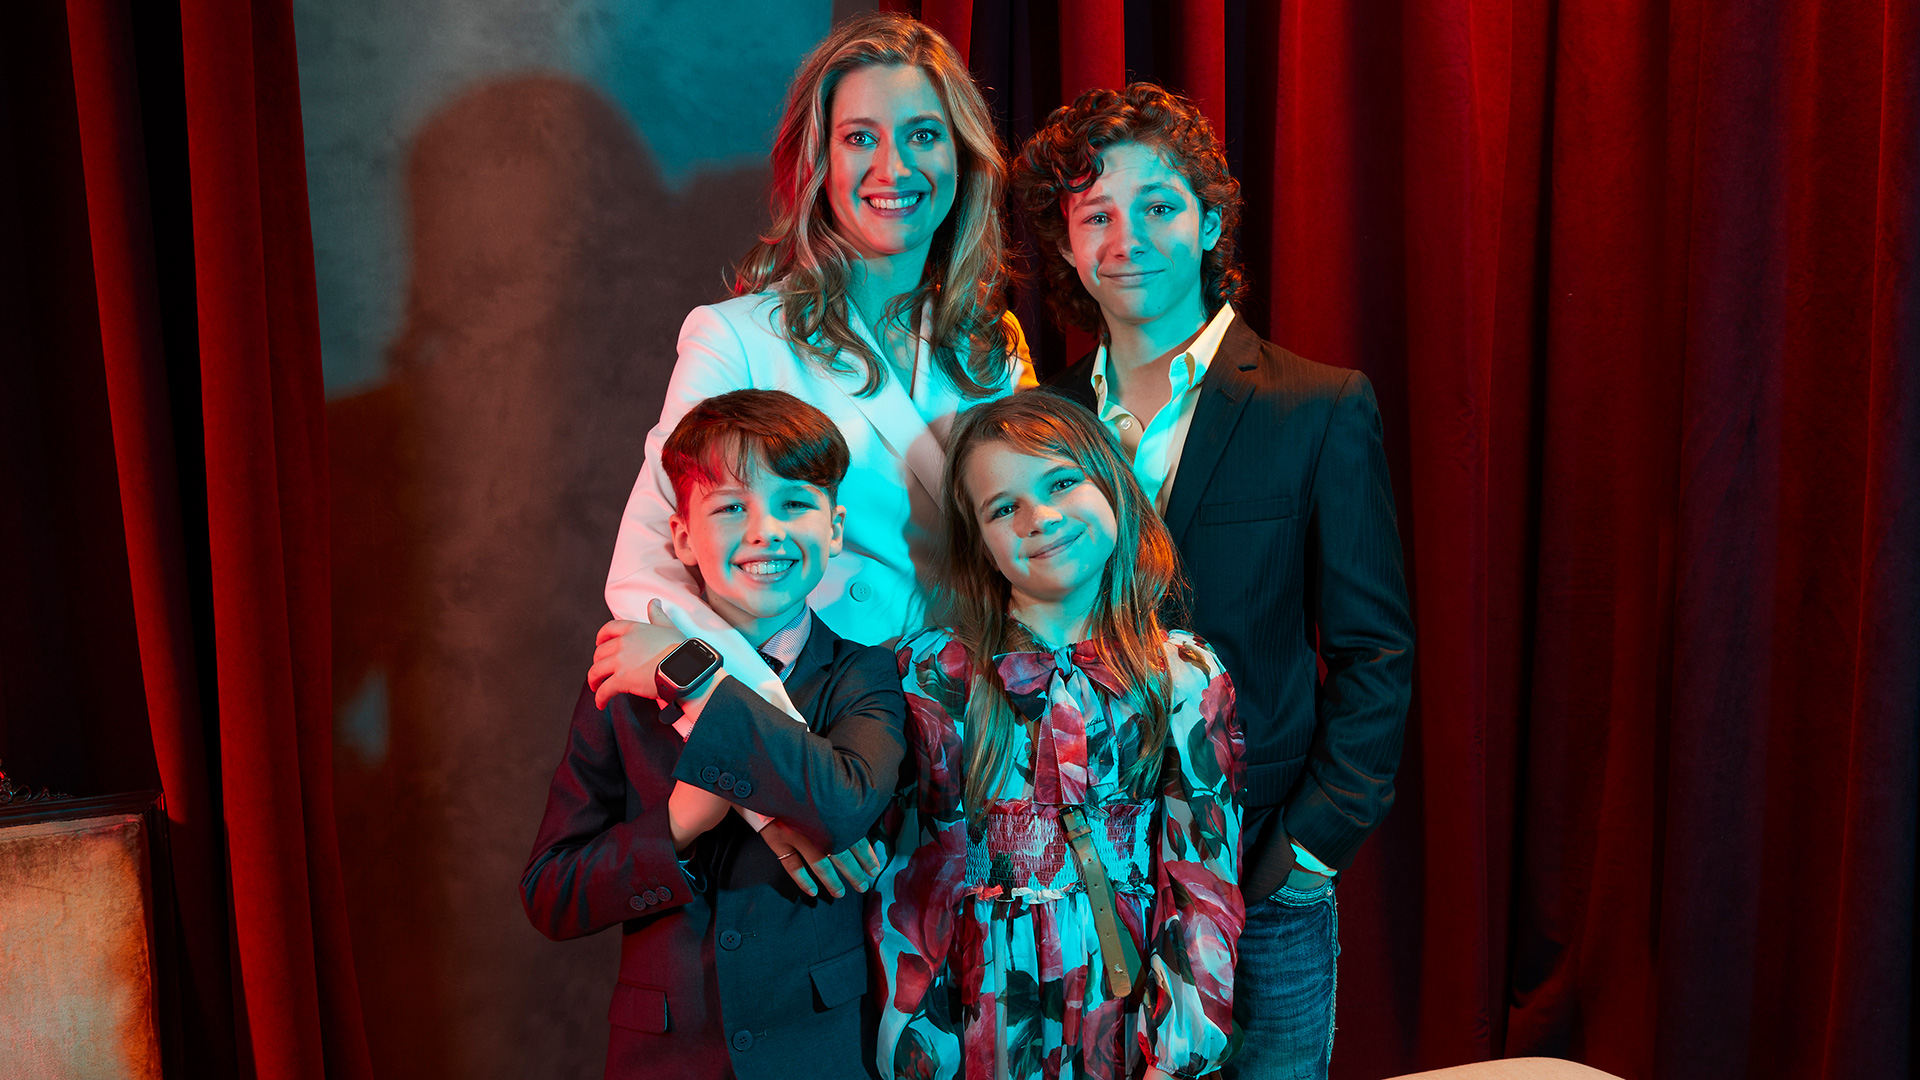 The cast of Young Sheldon couldn't be any cuter in these exclusive photos.